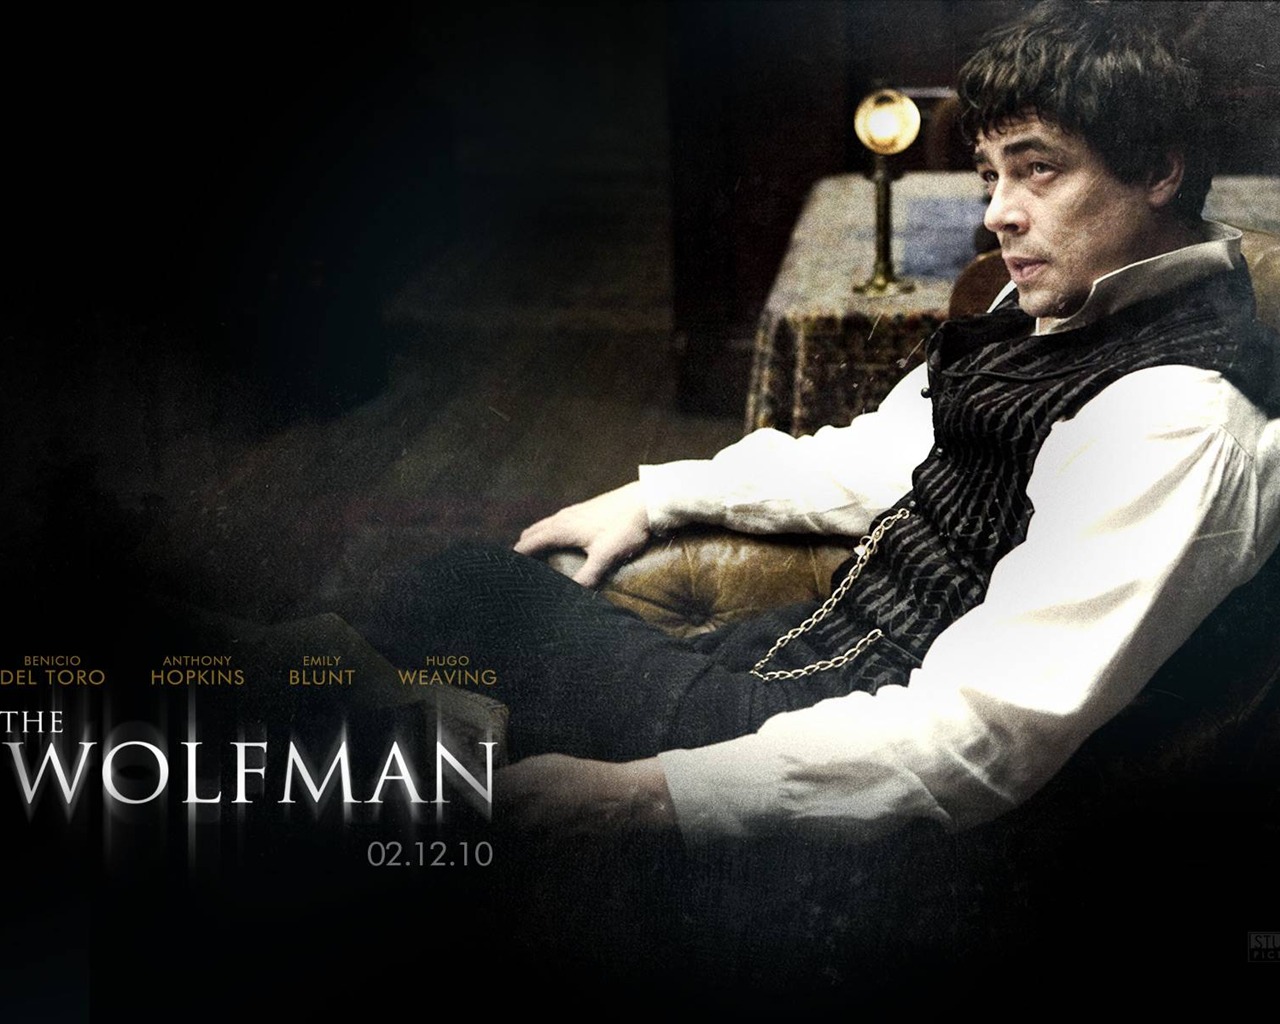 The Wolfman Movie Wallpapers #8 - 1280x1024